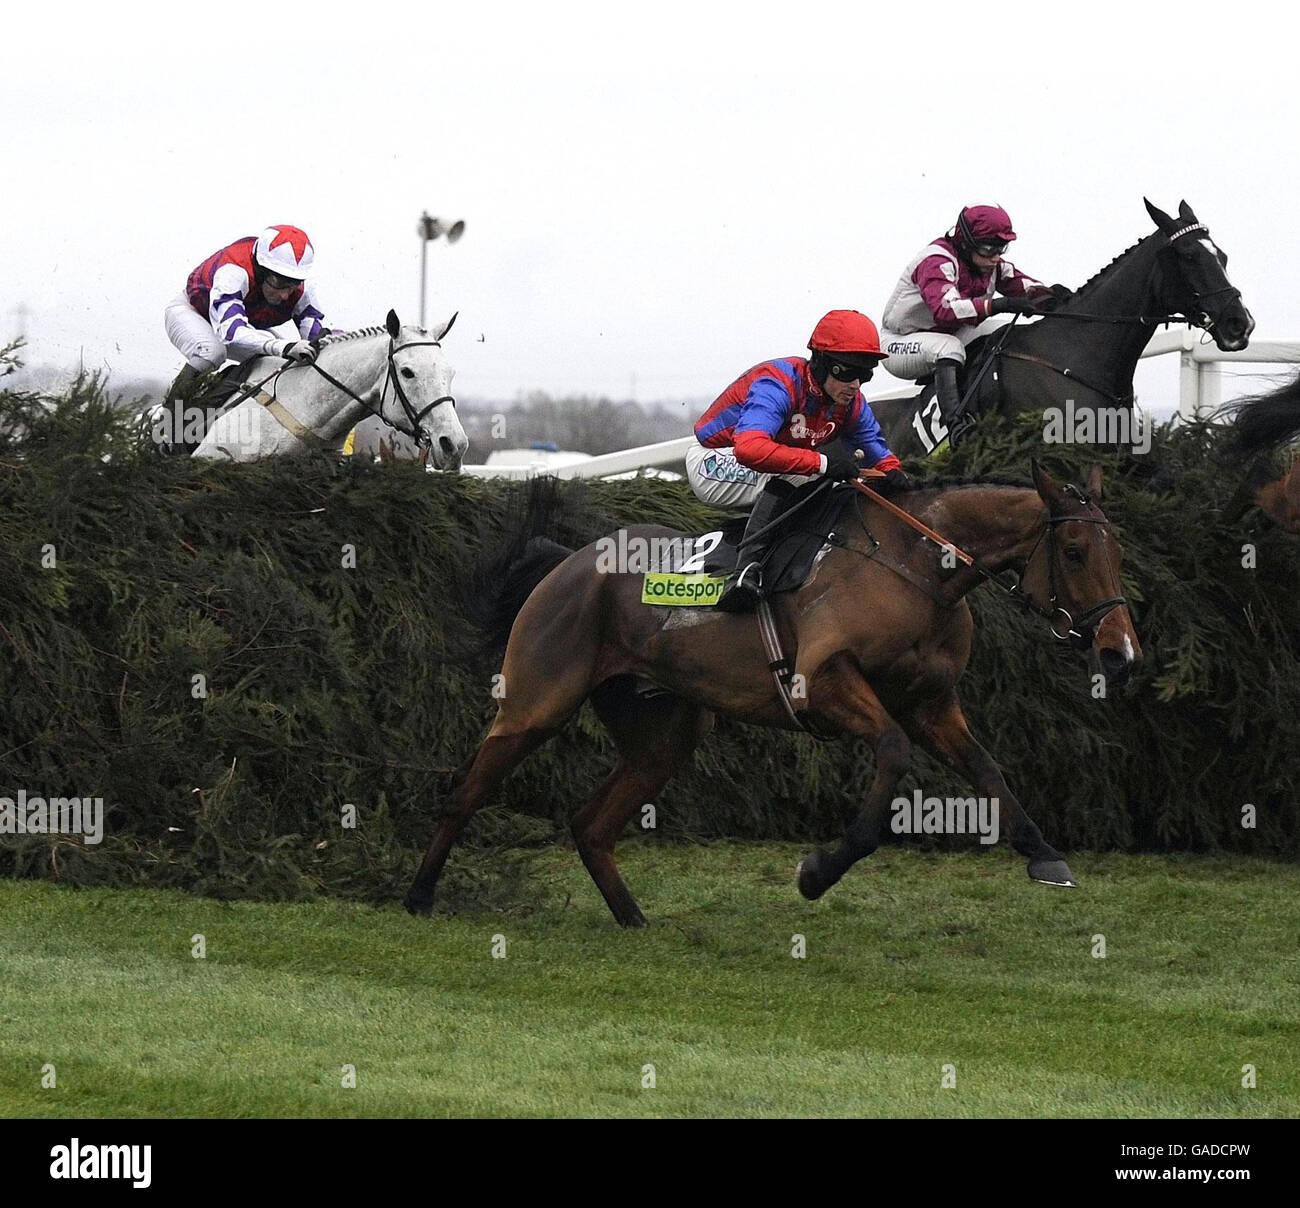 Jockey Sam Thomas and Mr Pointment (red cap) jump the Chair fence before going on to win in the totesport.com Becher Chase Handicap at Aintree Racecourse. Stock Photo